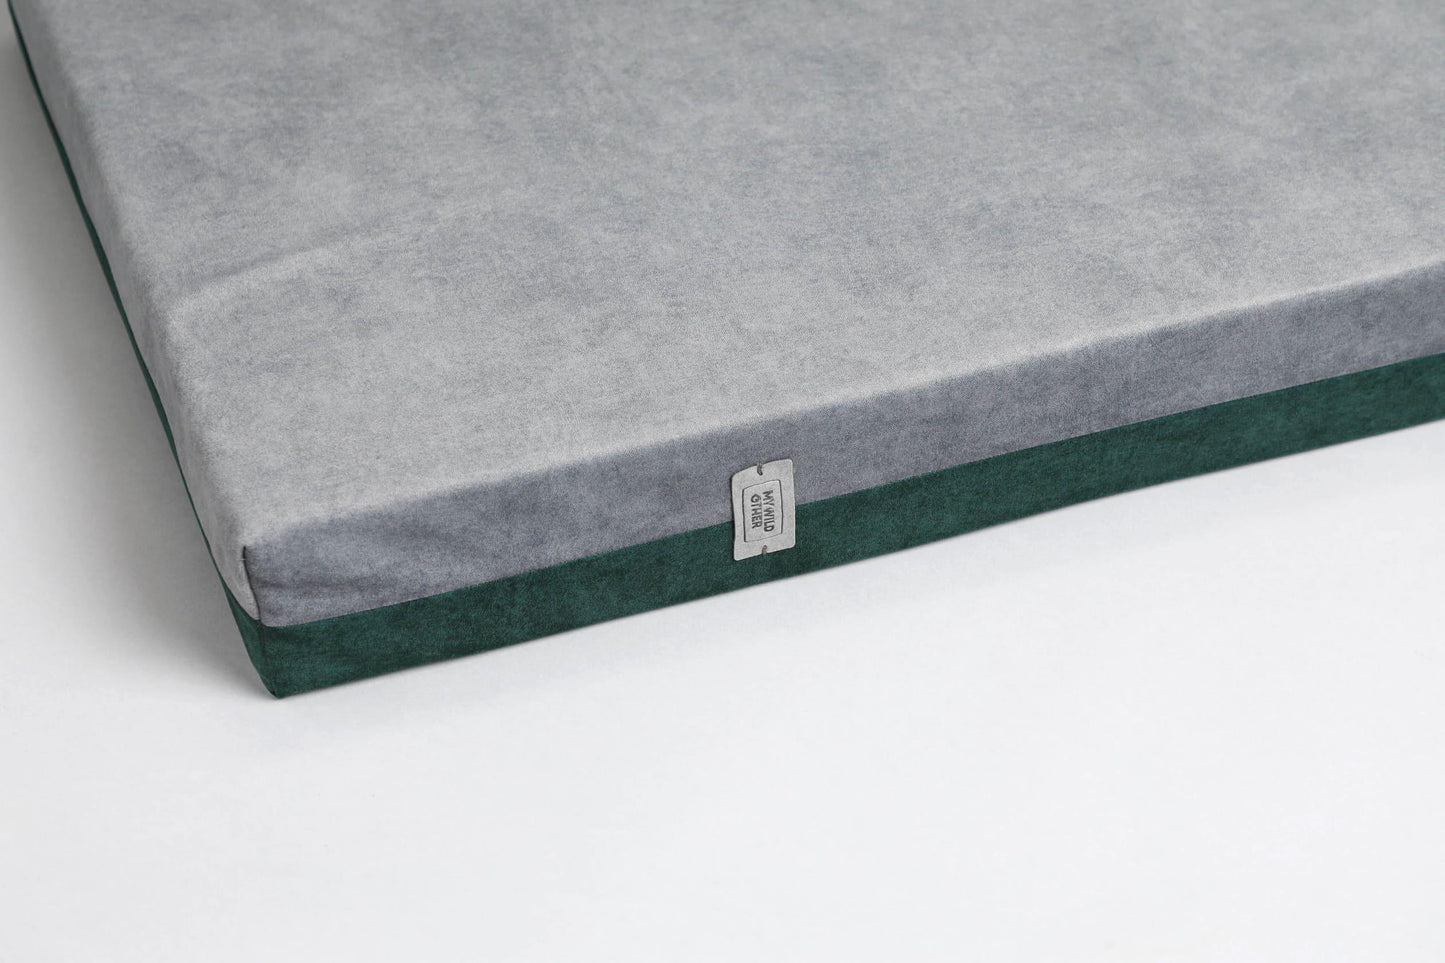 Transformer dog bed | Extra comfort & support | 2-sided | MOSS GREEN+STEEL GREY - premium dog goods handmade in Europe by My Wild Other